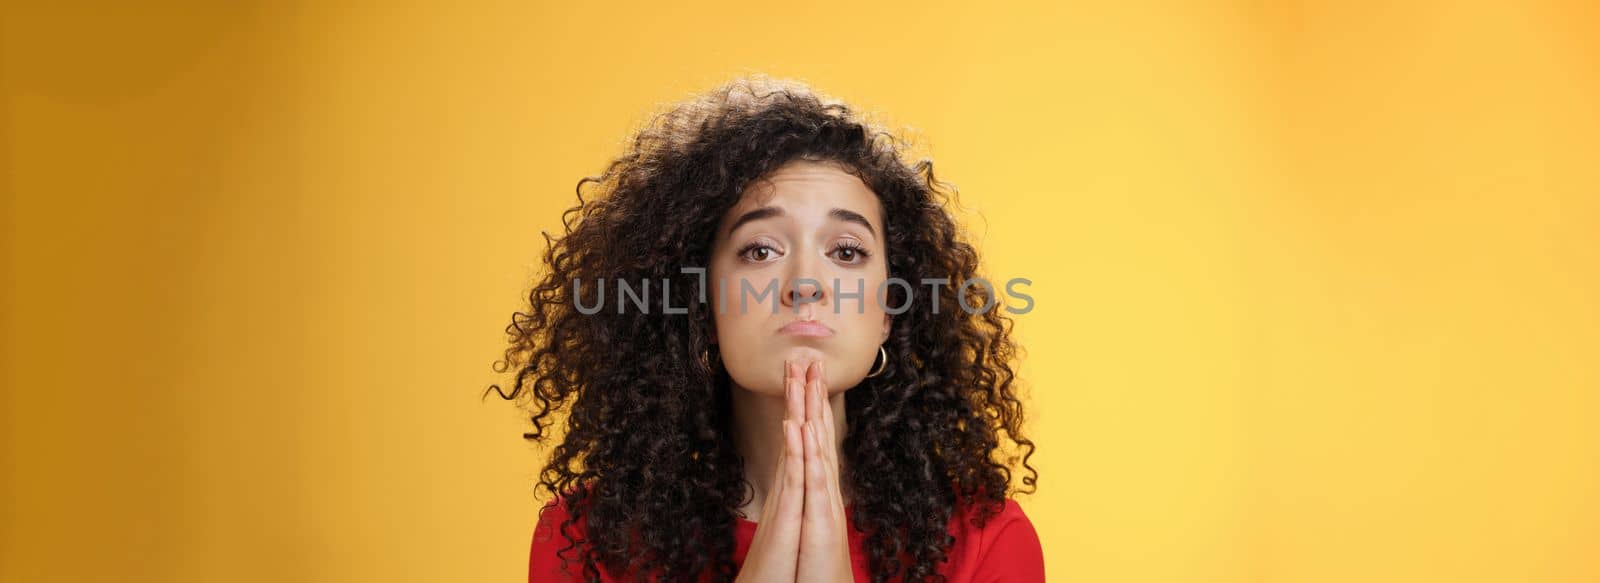 Please I beg you. Portrait of sad and cute curly-haired girl with angel eyes pouting holding hands in pray and looking hopeful at camera waiting for mercy asking apology, supplicating over yellow wall.